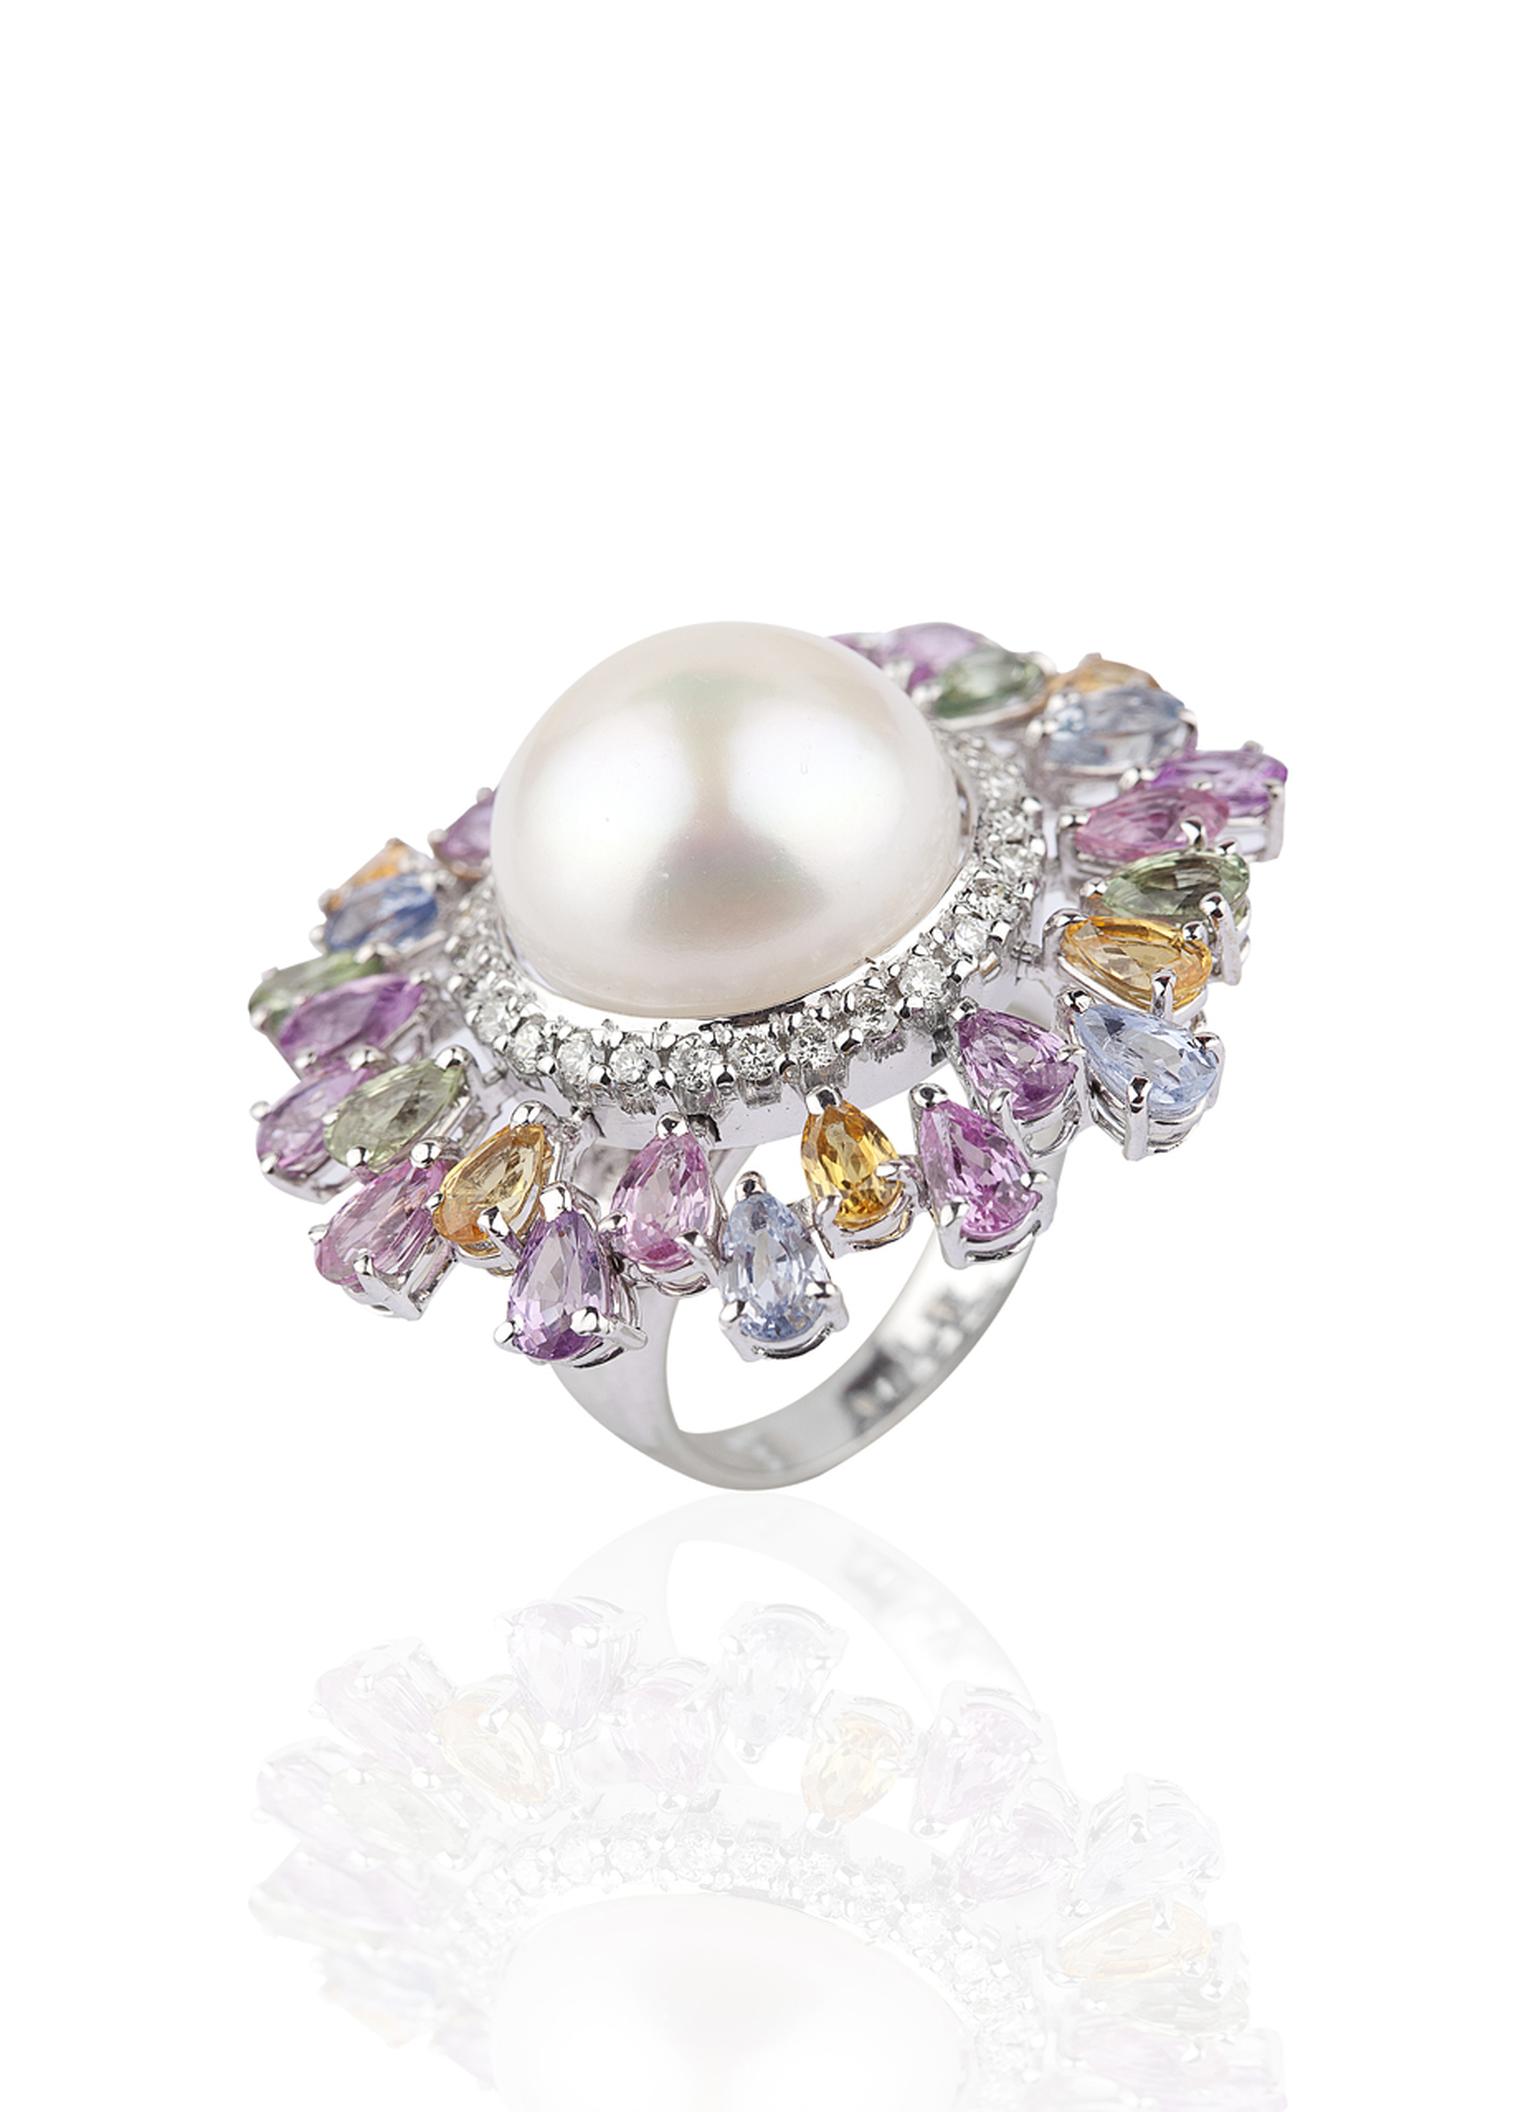 Mirari white gold ring featuring multi-coloured sapphires and round brilliant cut diamonds surrounding a freshwater button pearl.